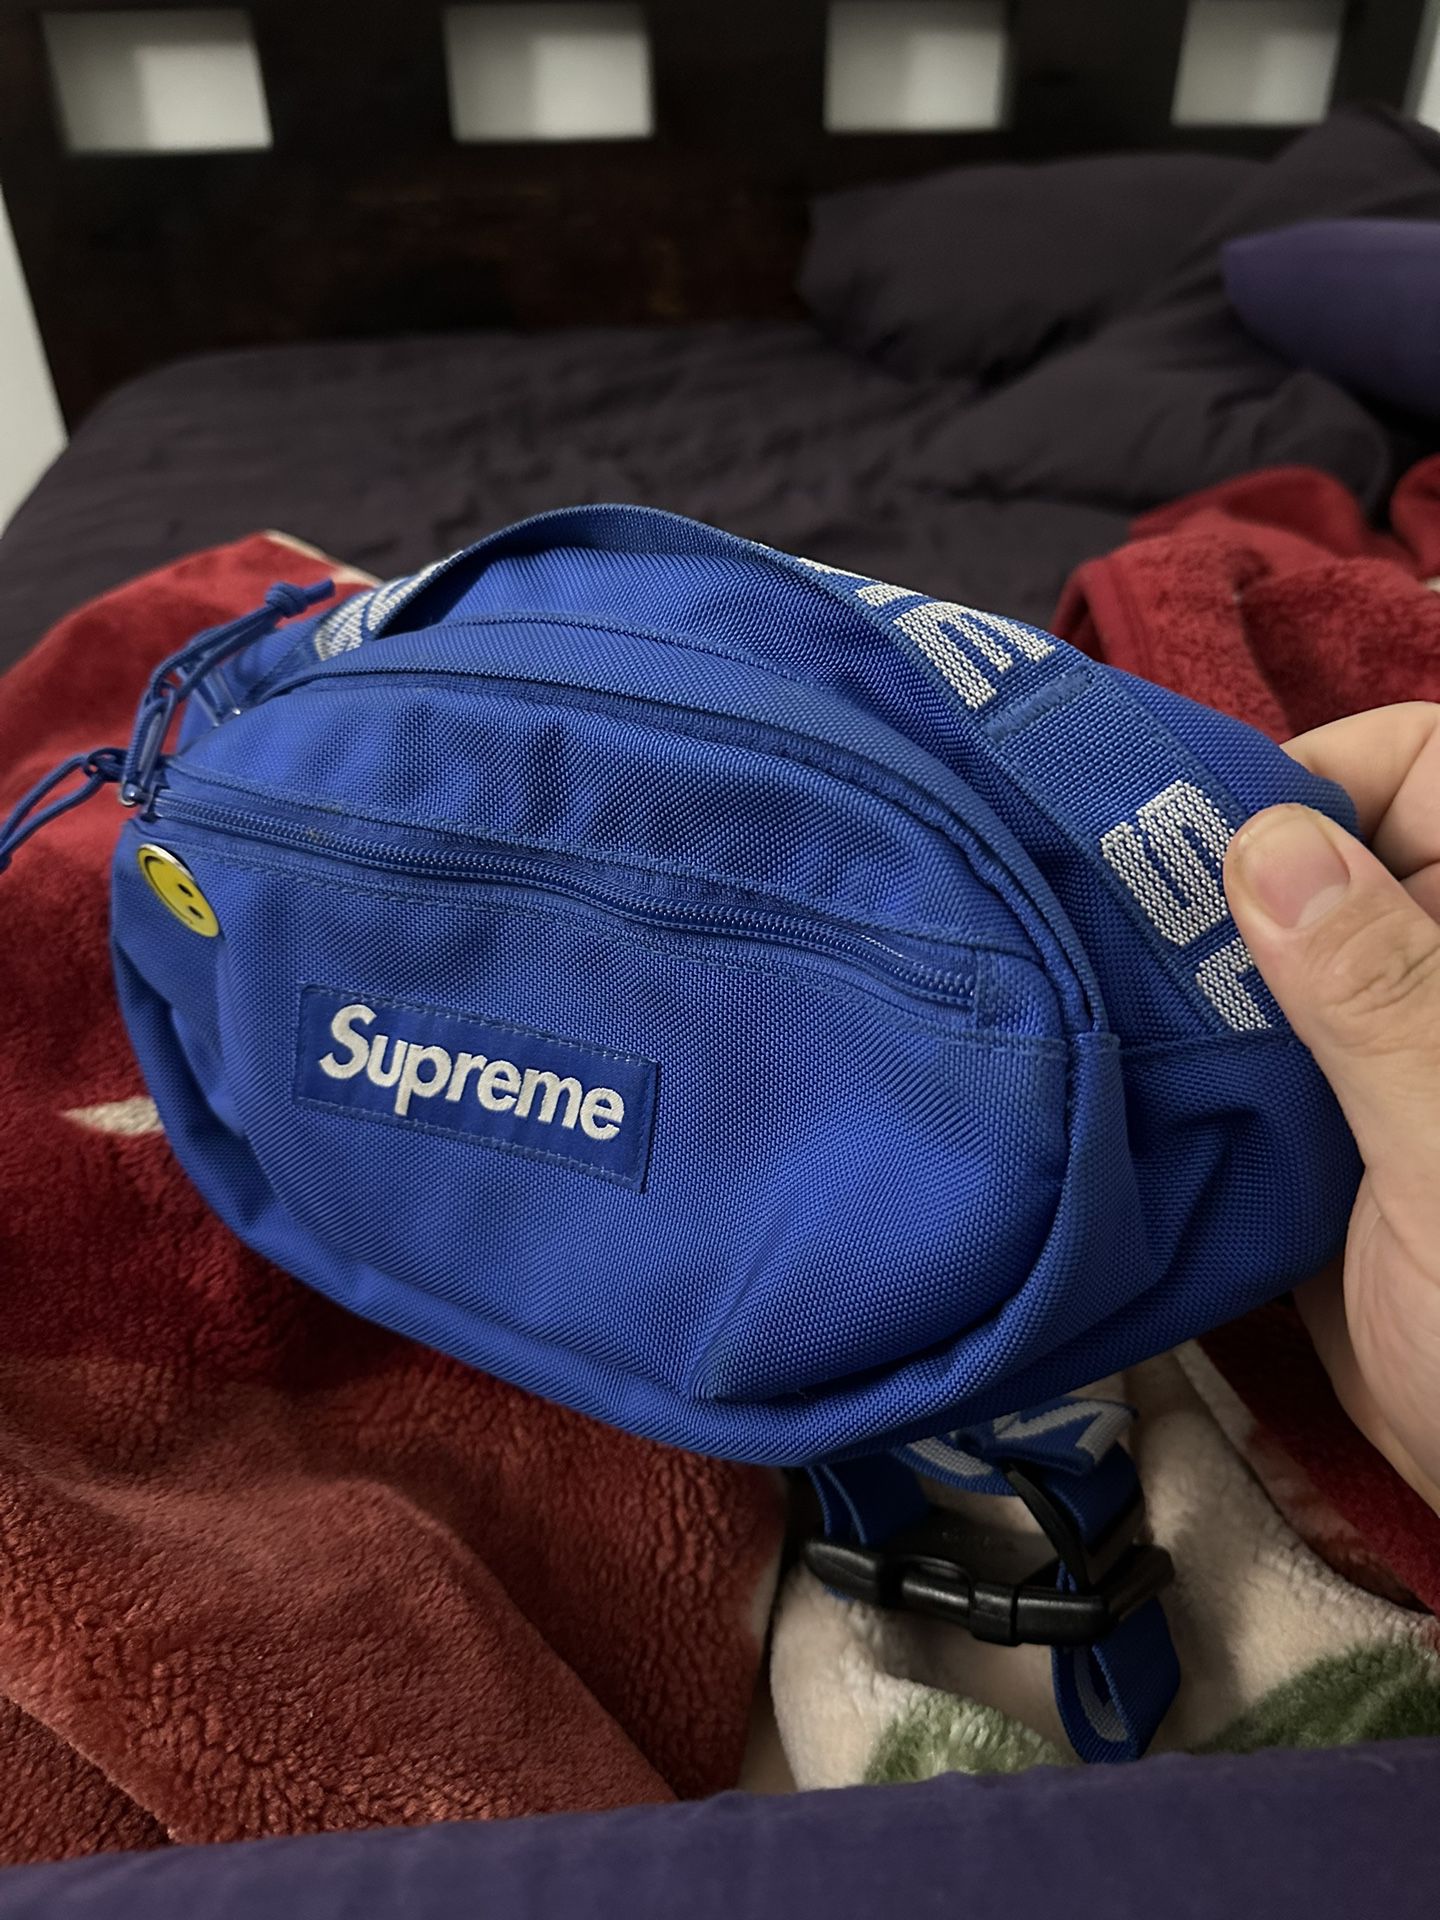 RED SUPREME FANNY PACK for Sale in Lowell, MA - OfferUp